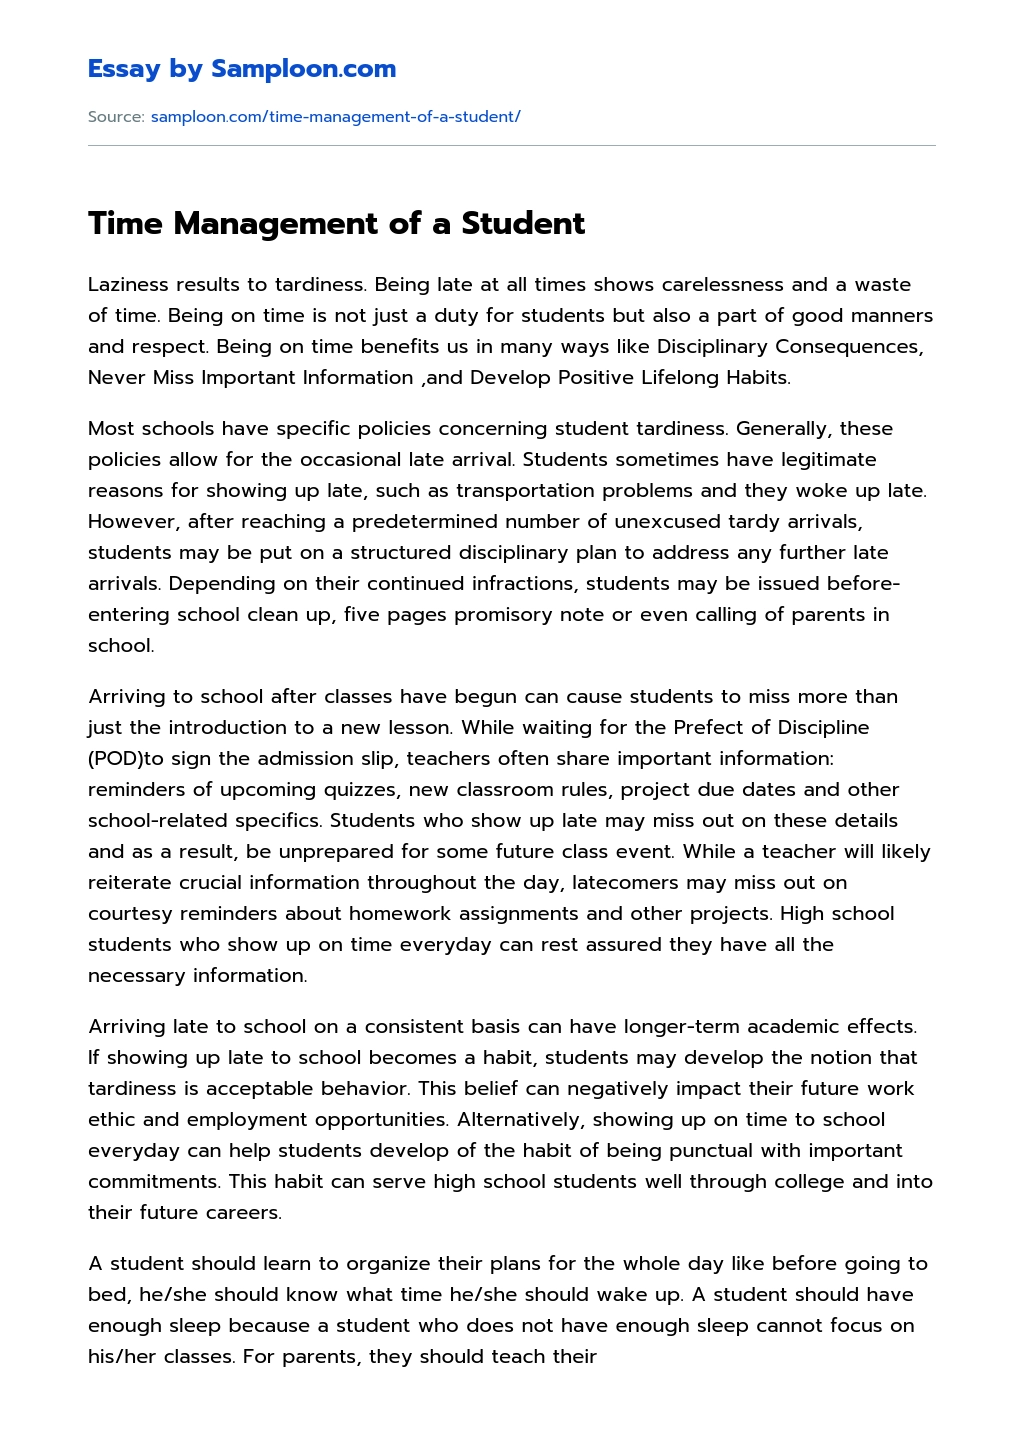 Time Management of a Student essay